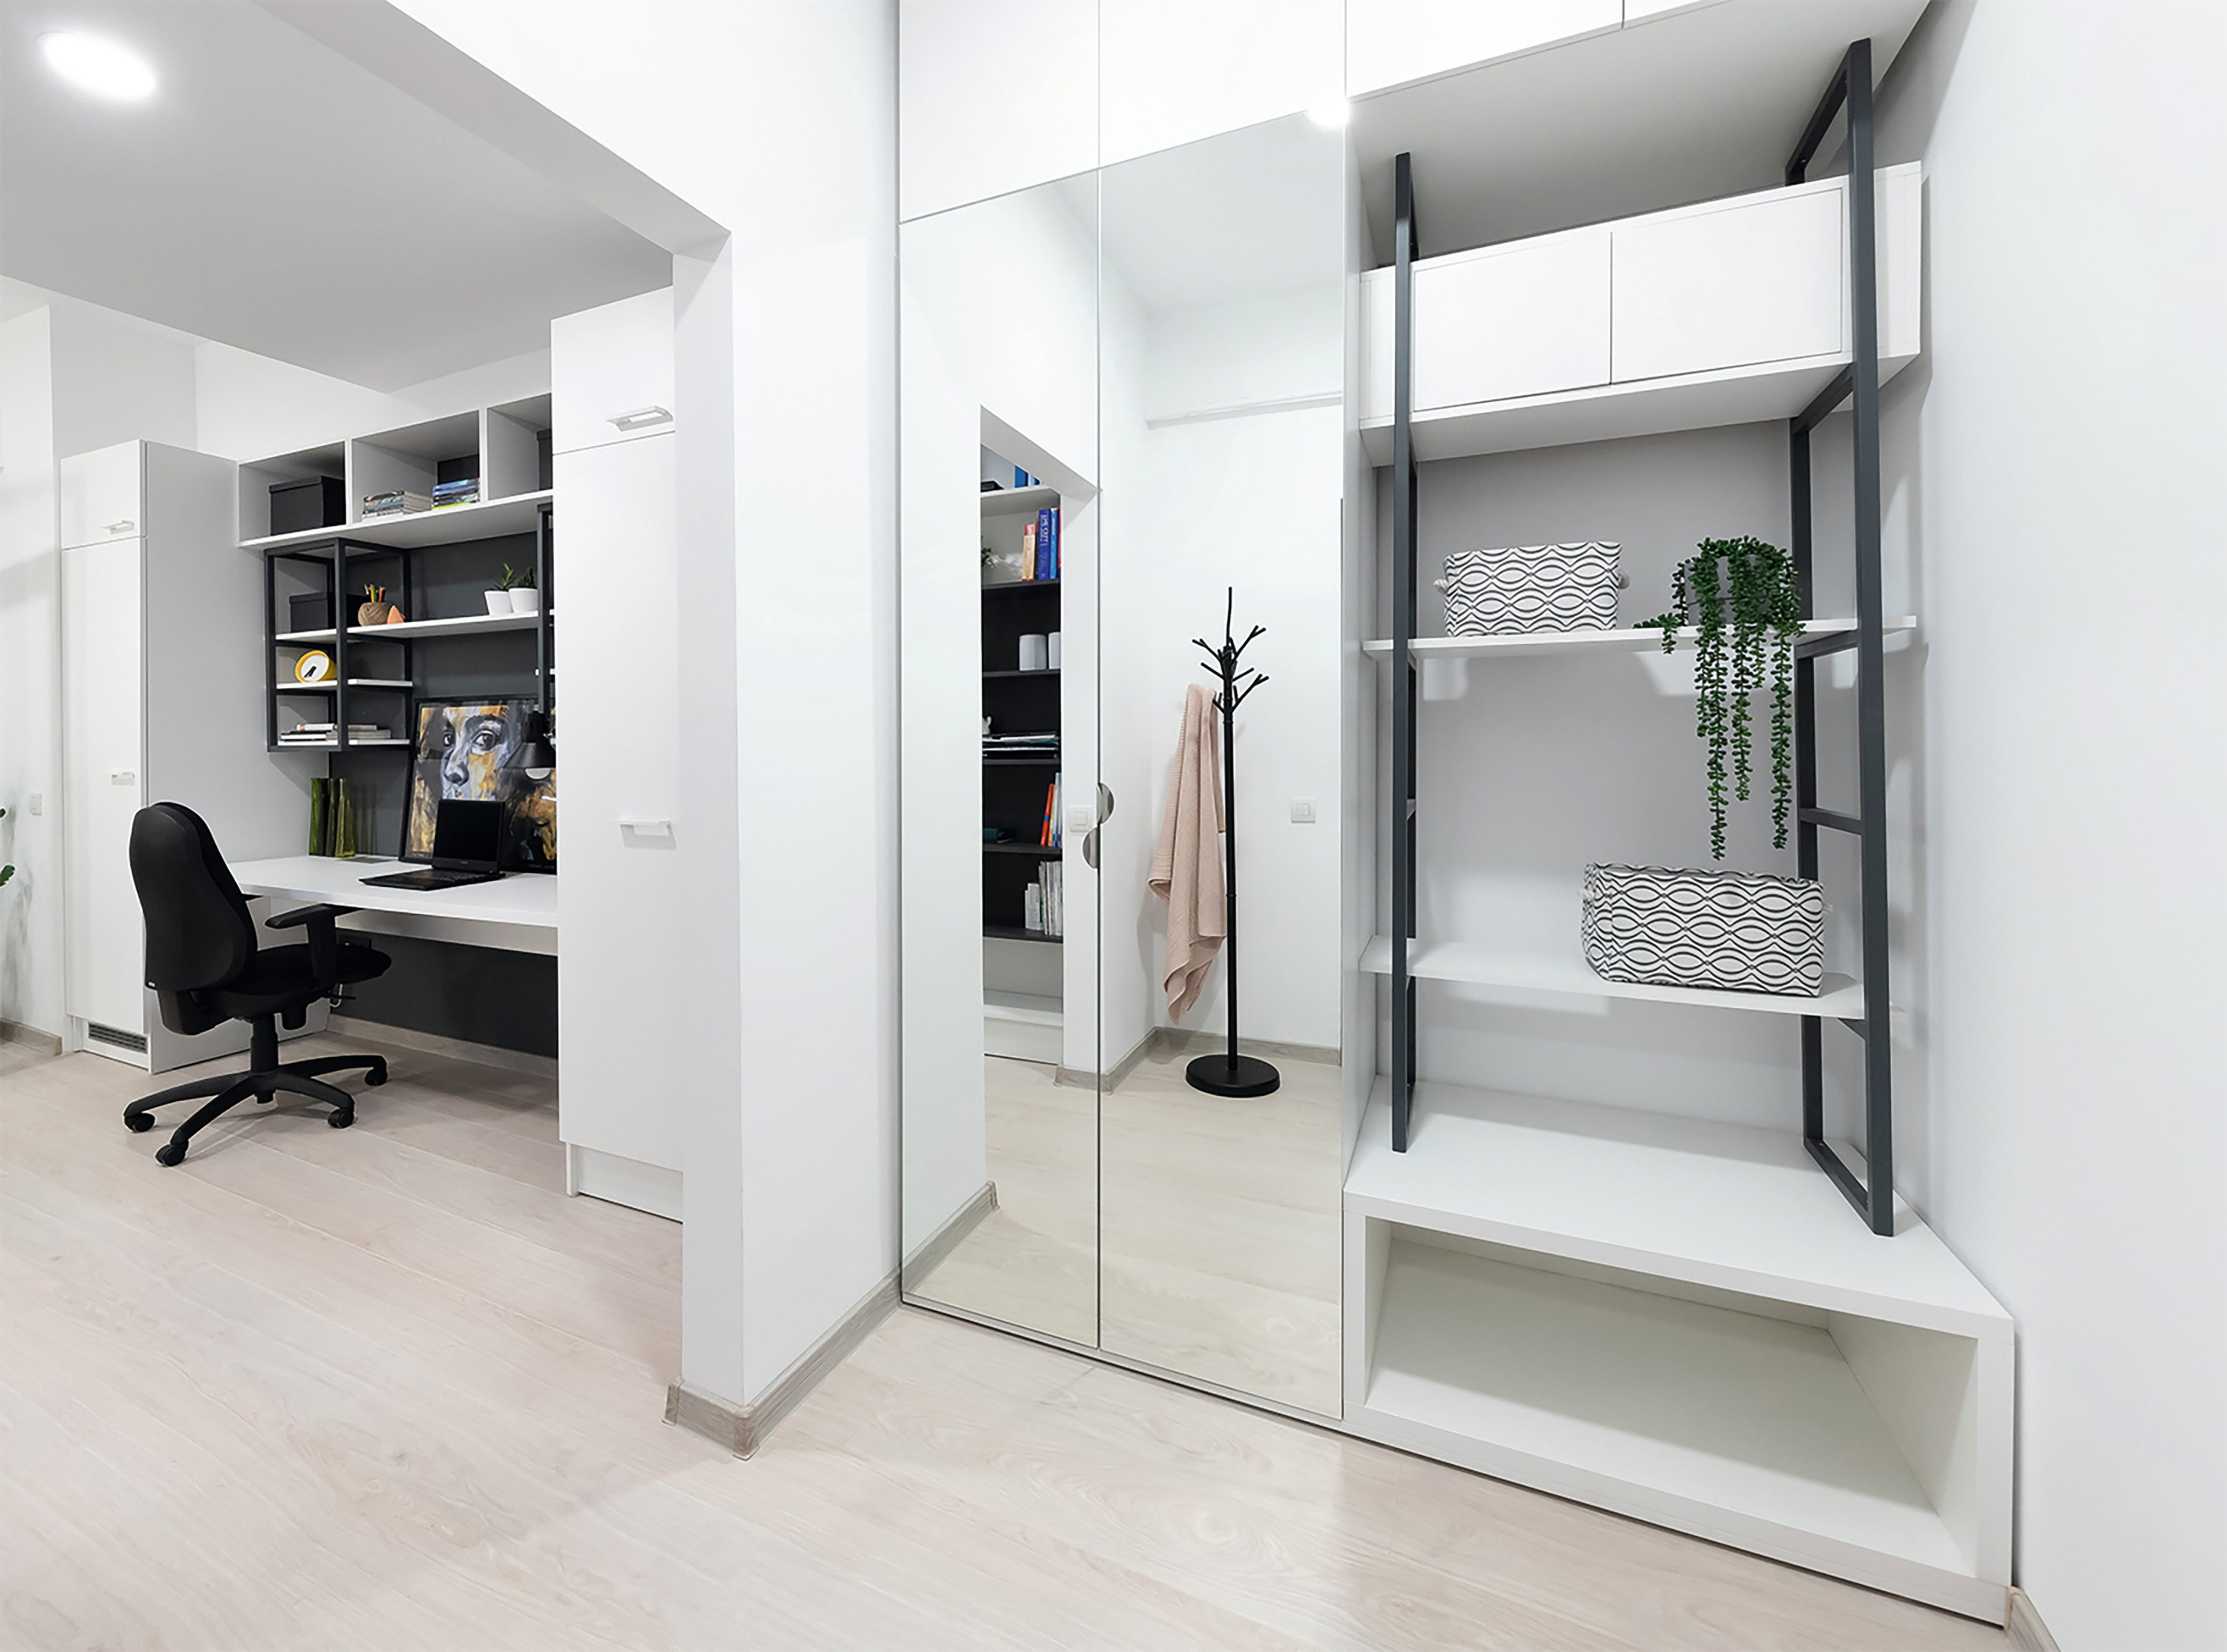 The use of W1000 Premium White together with mirrored closet fronts give the impression of an expansive entryway.